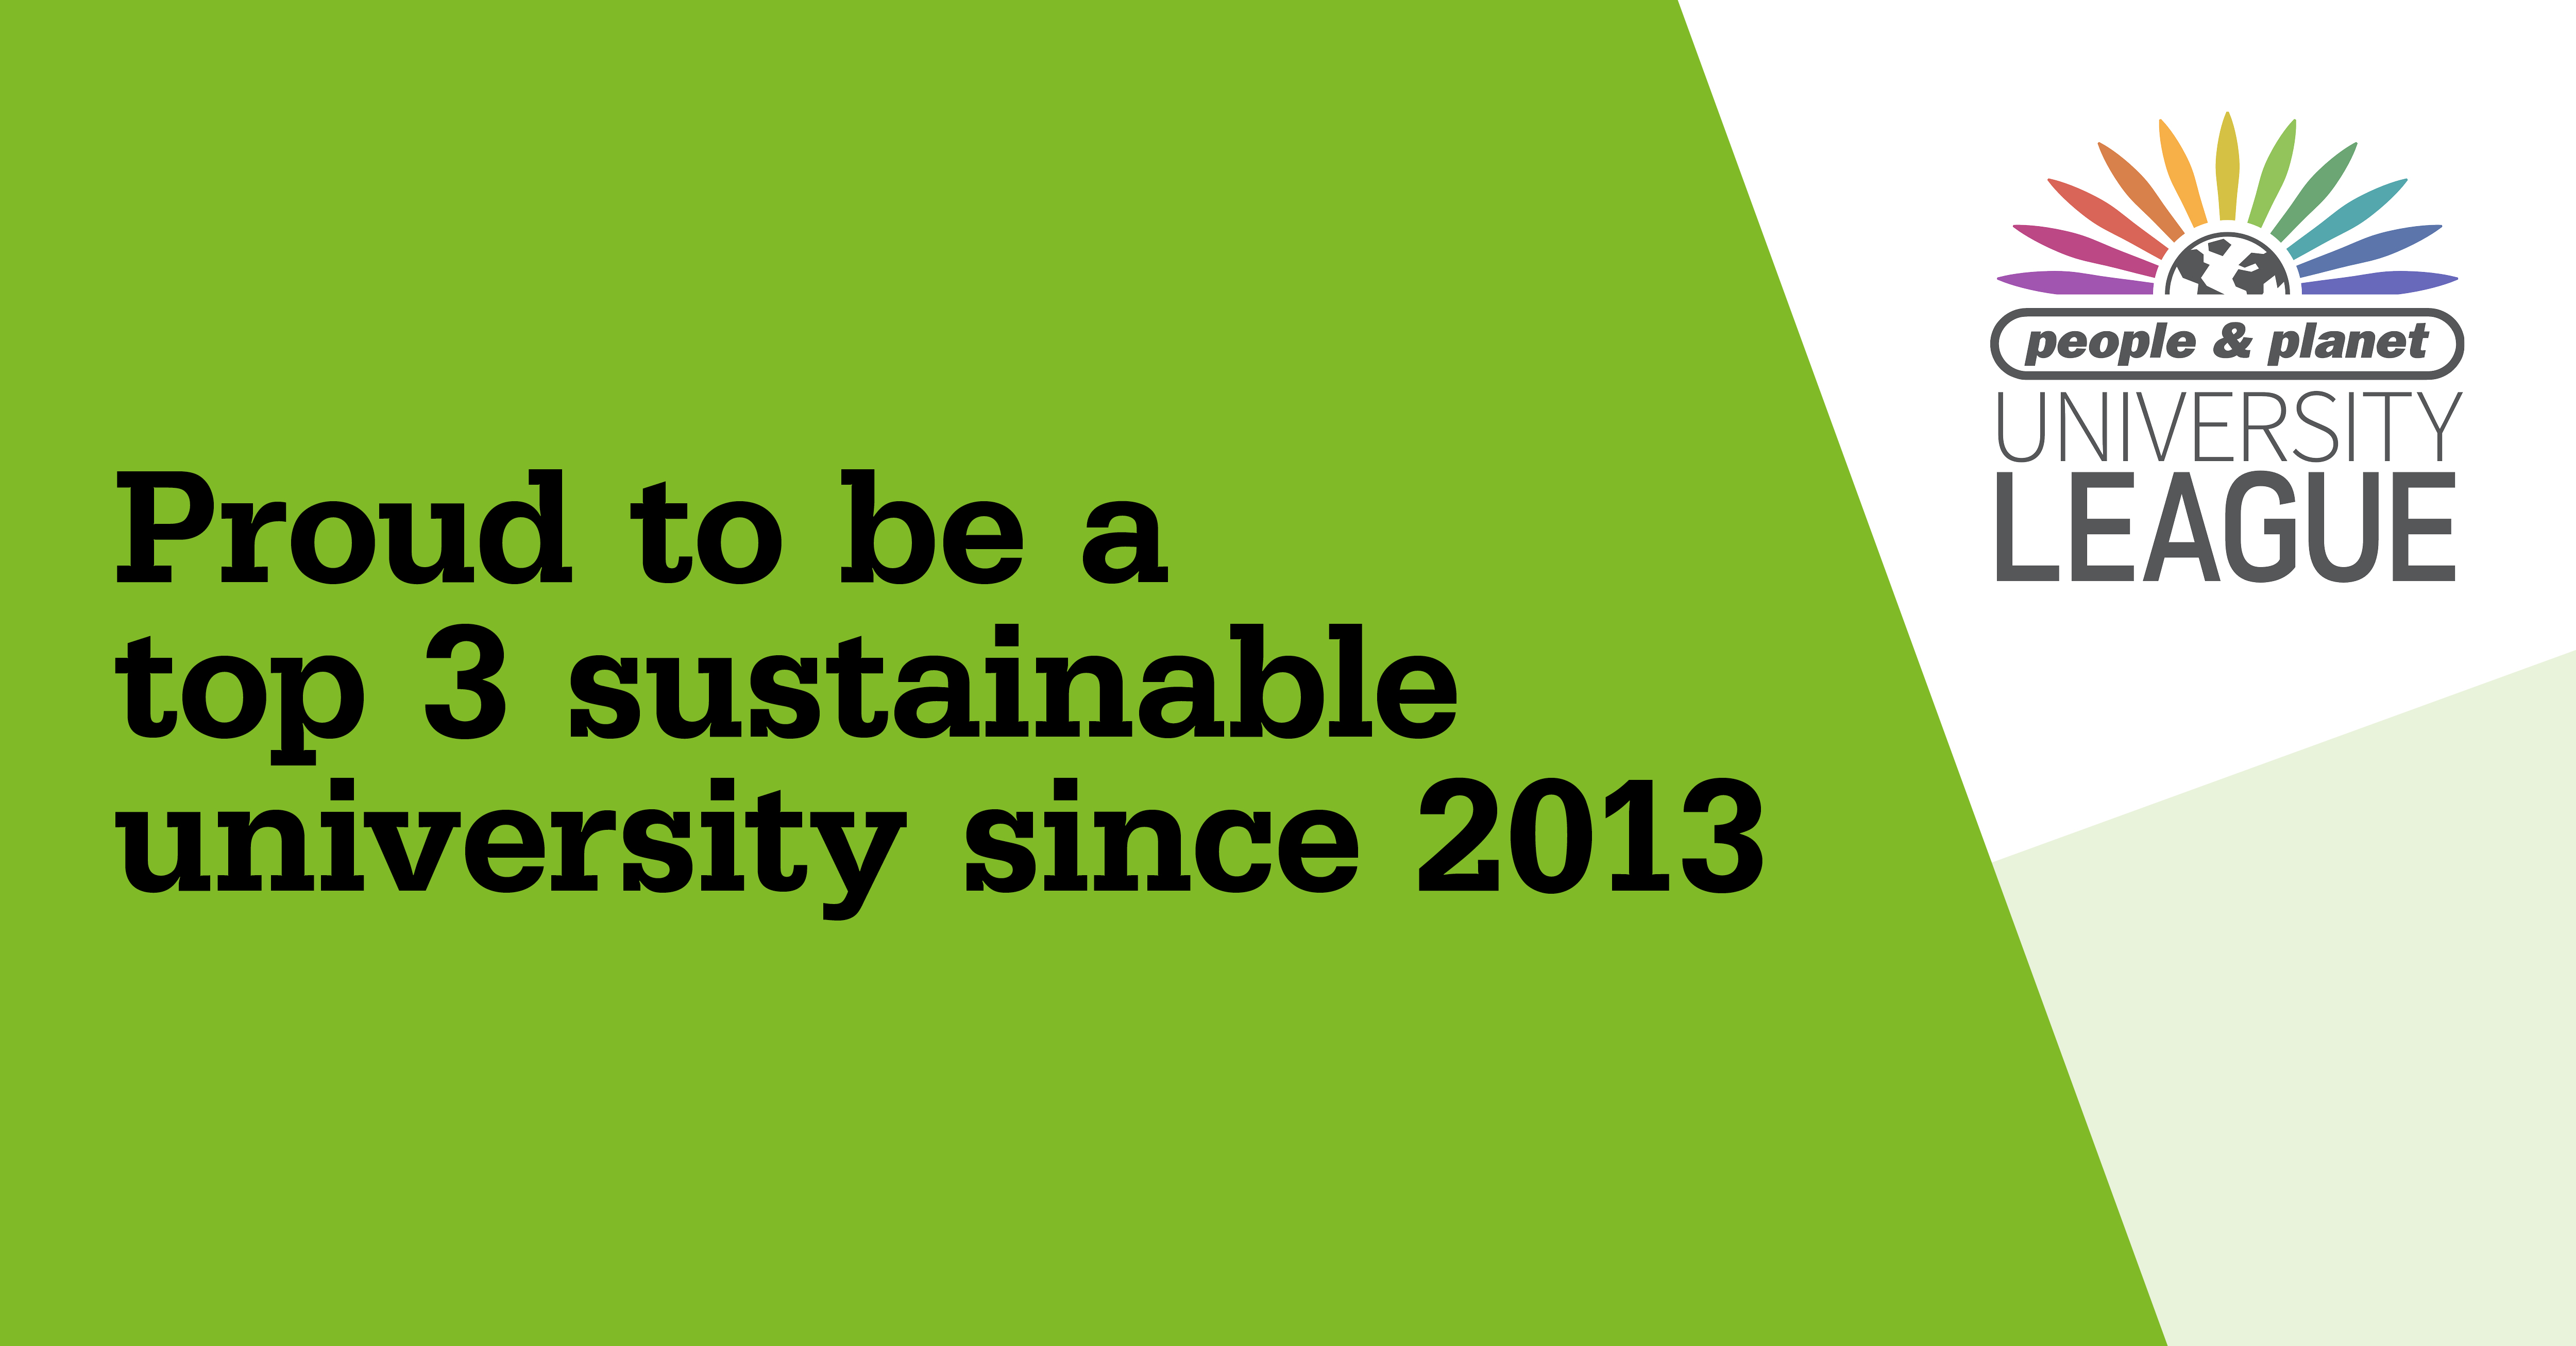 Proud to be a top 3 sustainable university since 2013